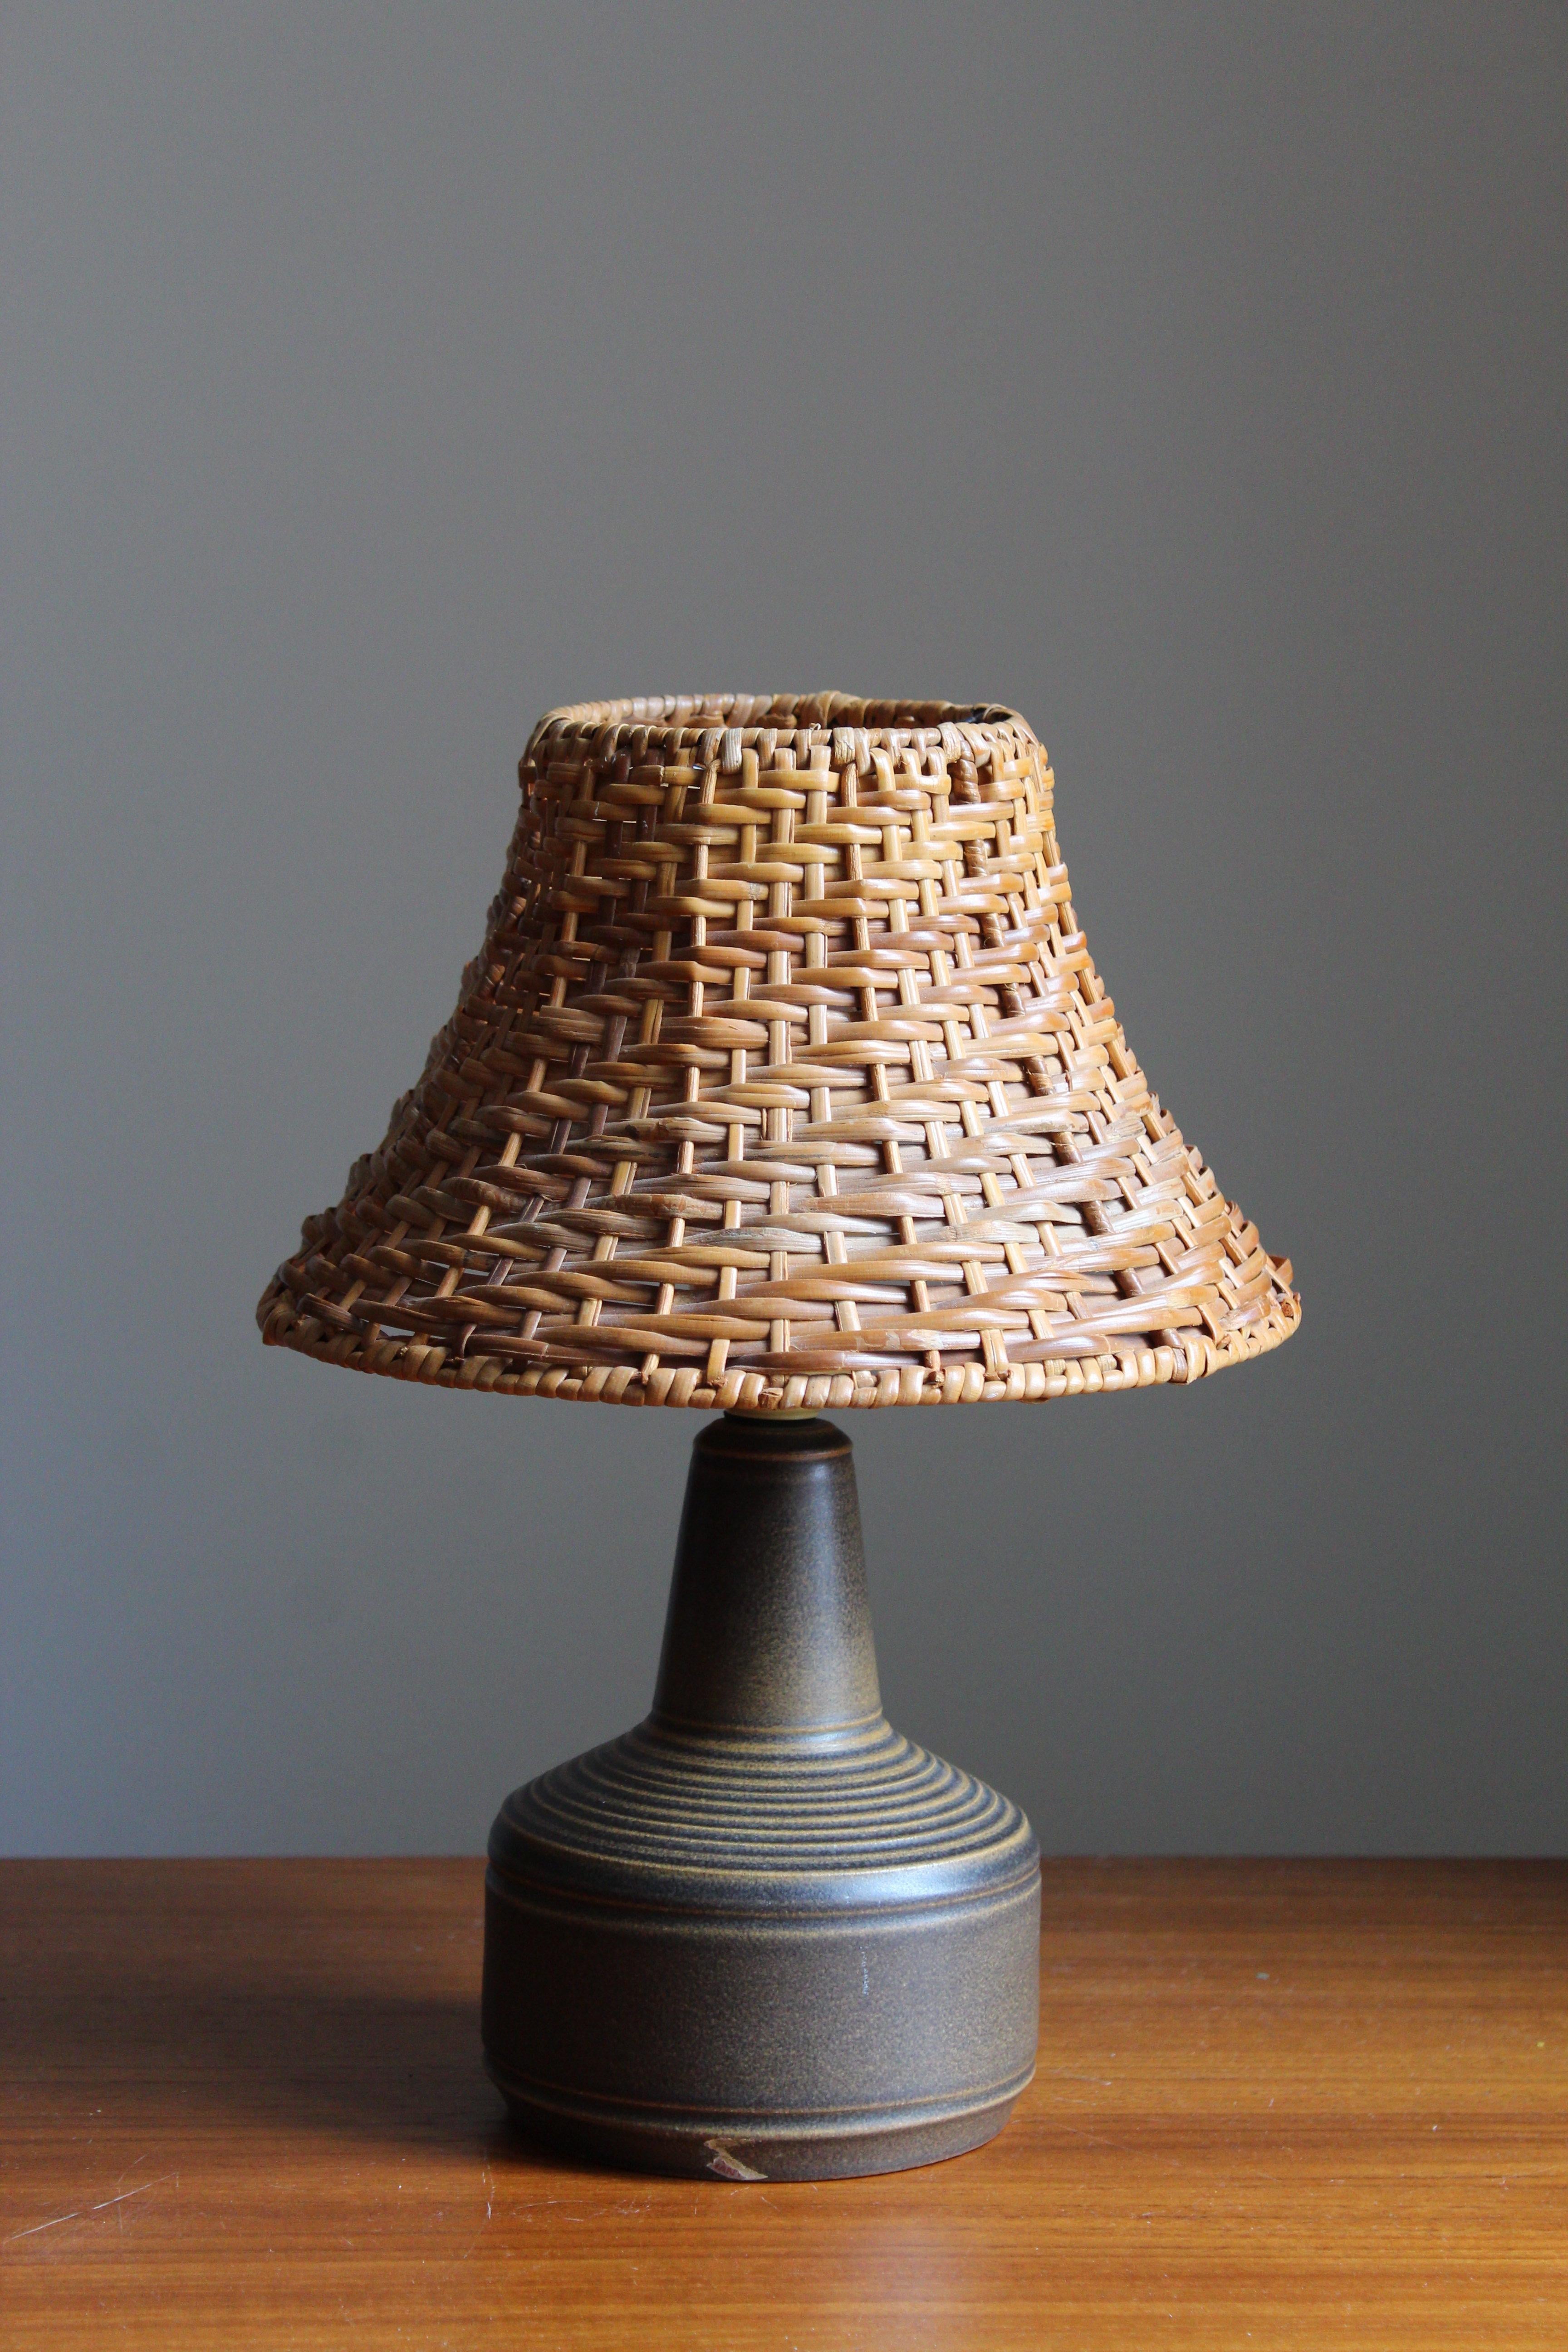 A stoneware table lamp designed by Henry Brandi, and produced by his own firm, Brandi Vejbystrand, Sweden, 1960s. Marked and labeled. 

Stated dimensions exclude lamsphade. Height includes socket. Upon request illustrated lampshade can be included